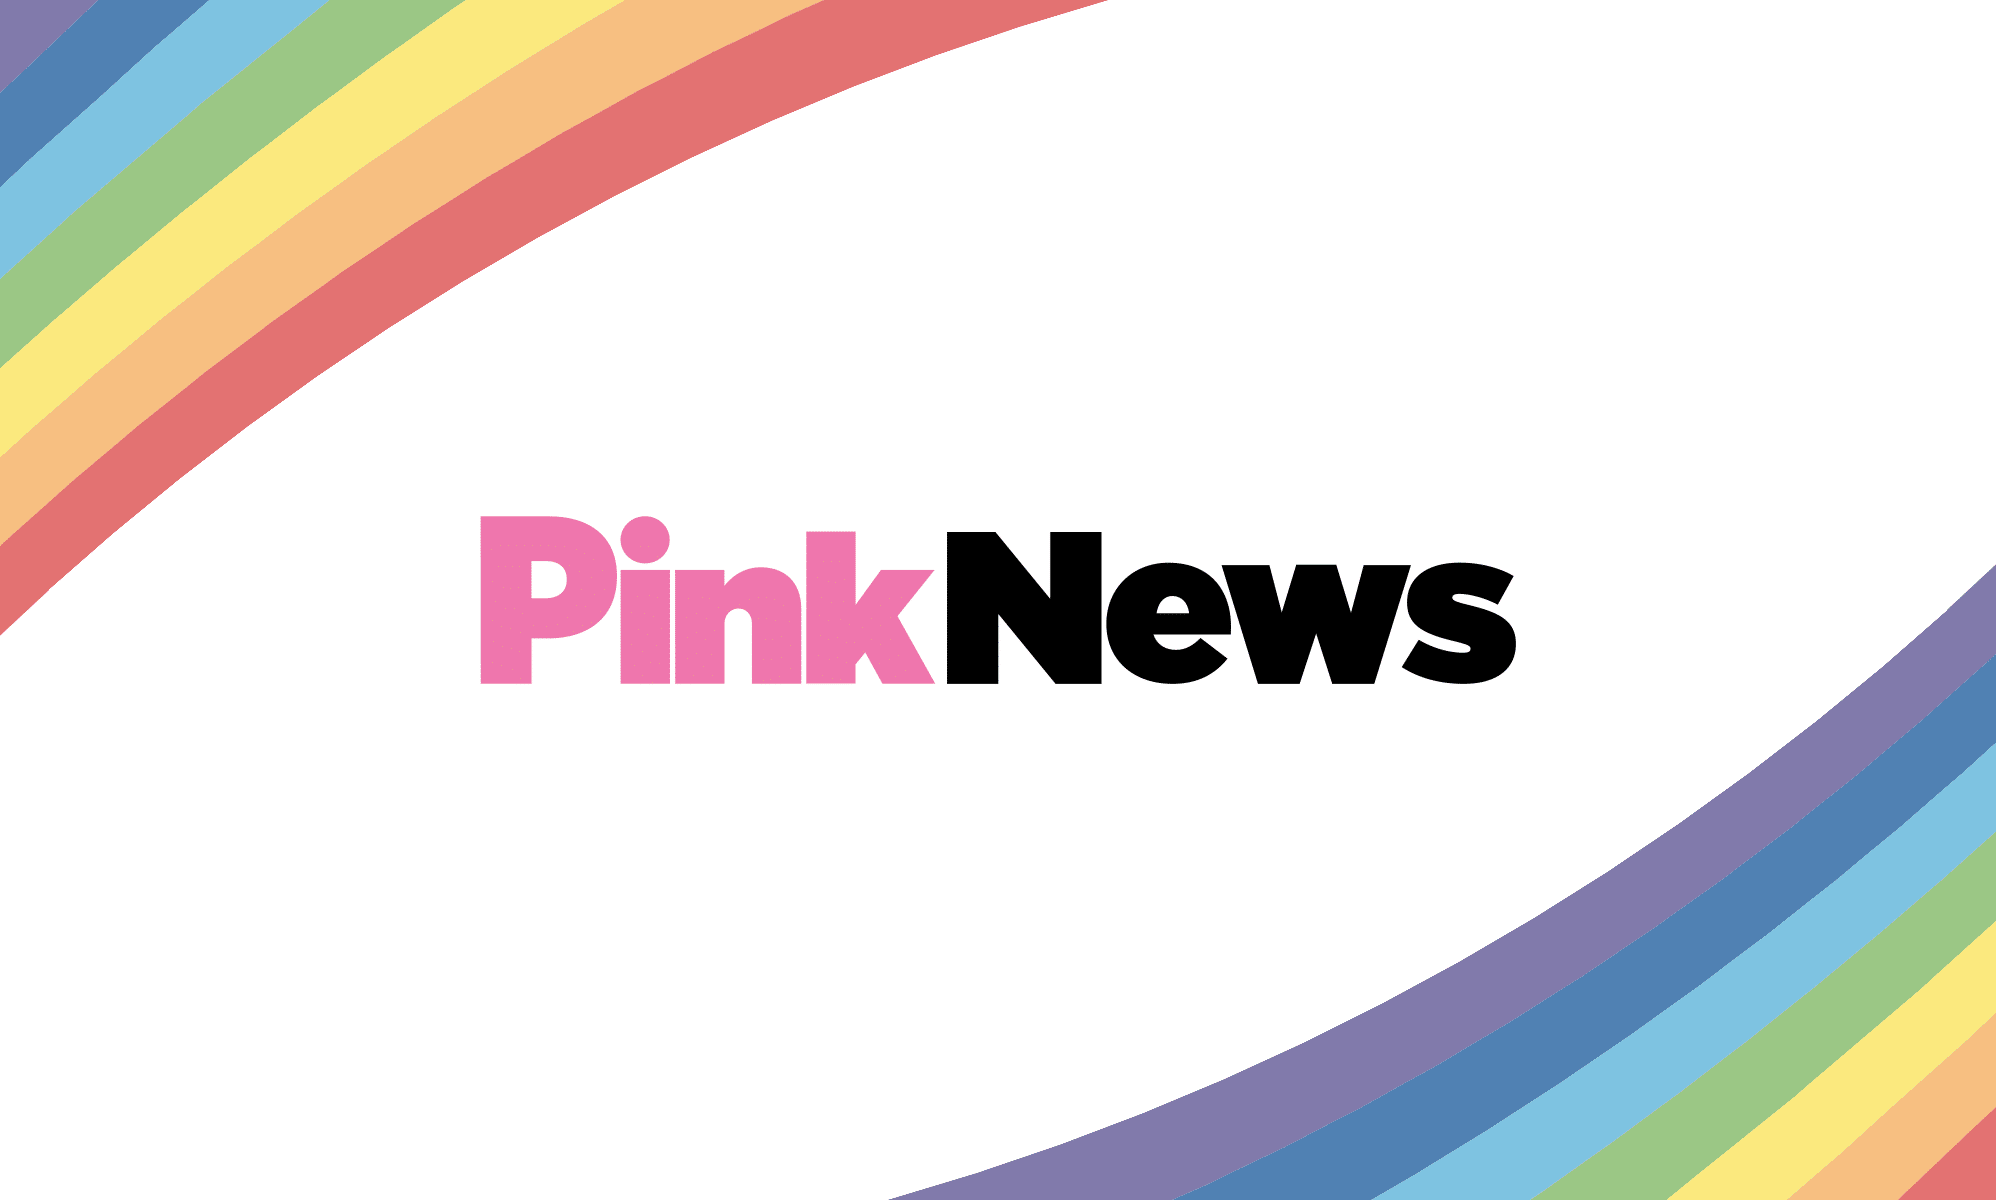 The nominees for the PinkNews Ad Campaign of the Year award